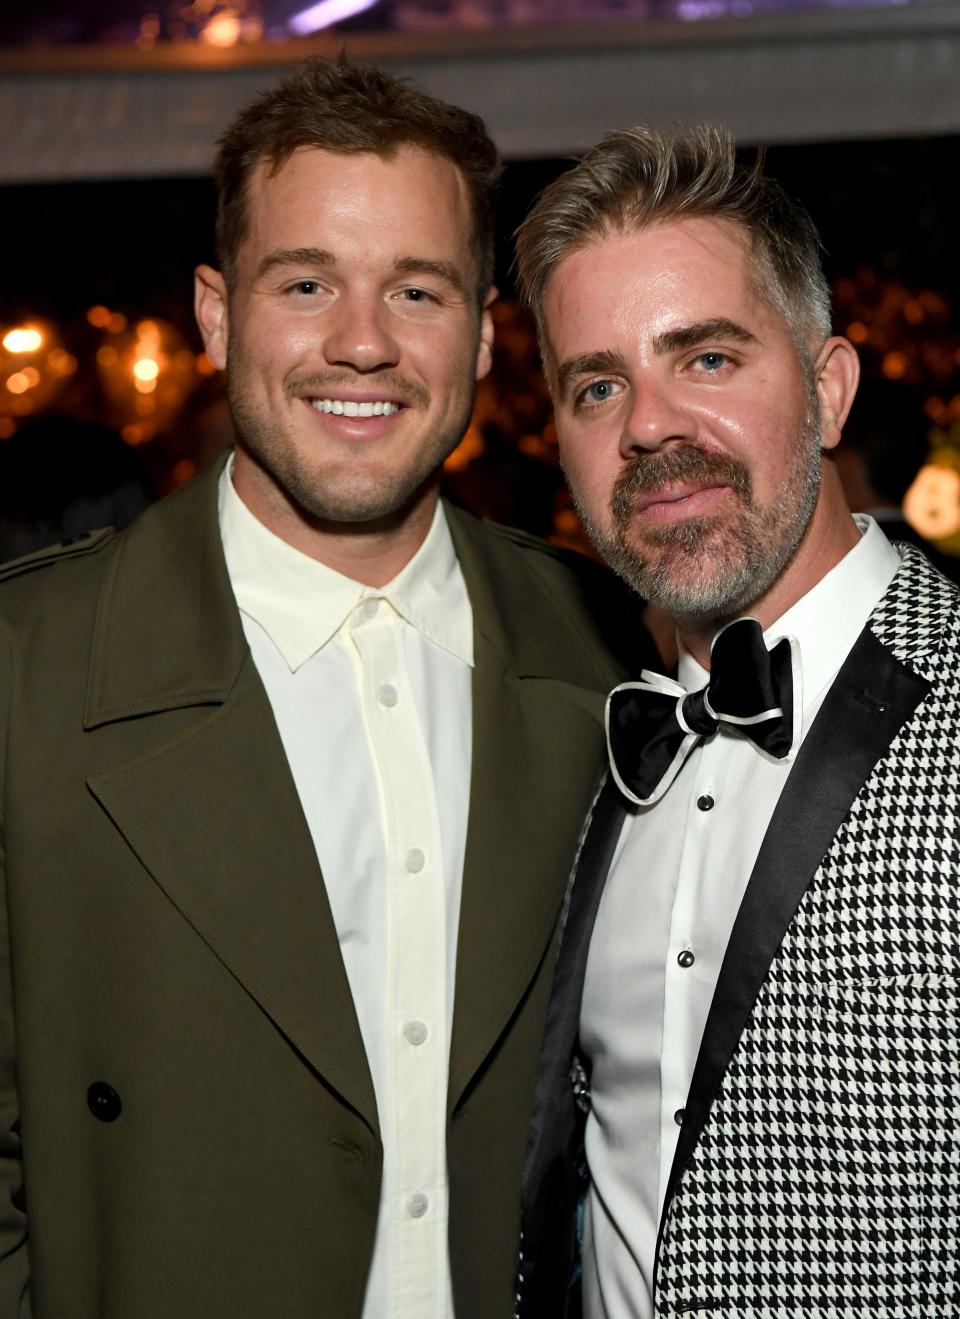 Colton Underwood pictured with husband, Jordan C. Brown, at the Baby2Baby 10-year gala in November 2021 in Los Angeles. The gala raises money for children experiencing poverty.